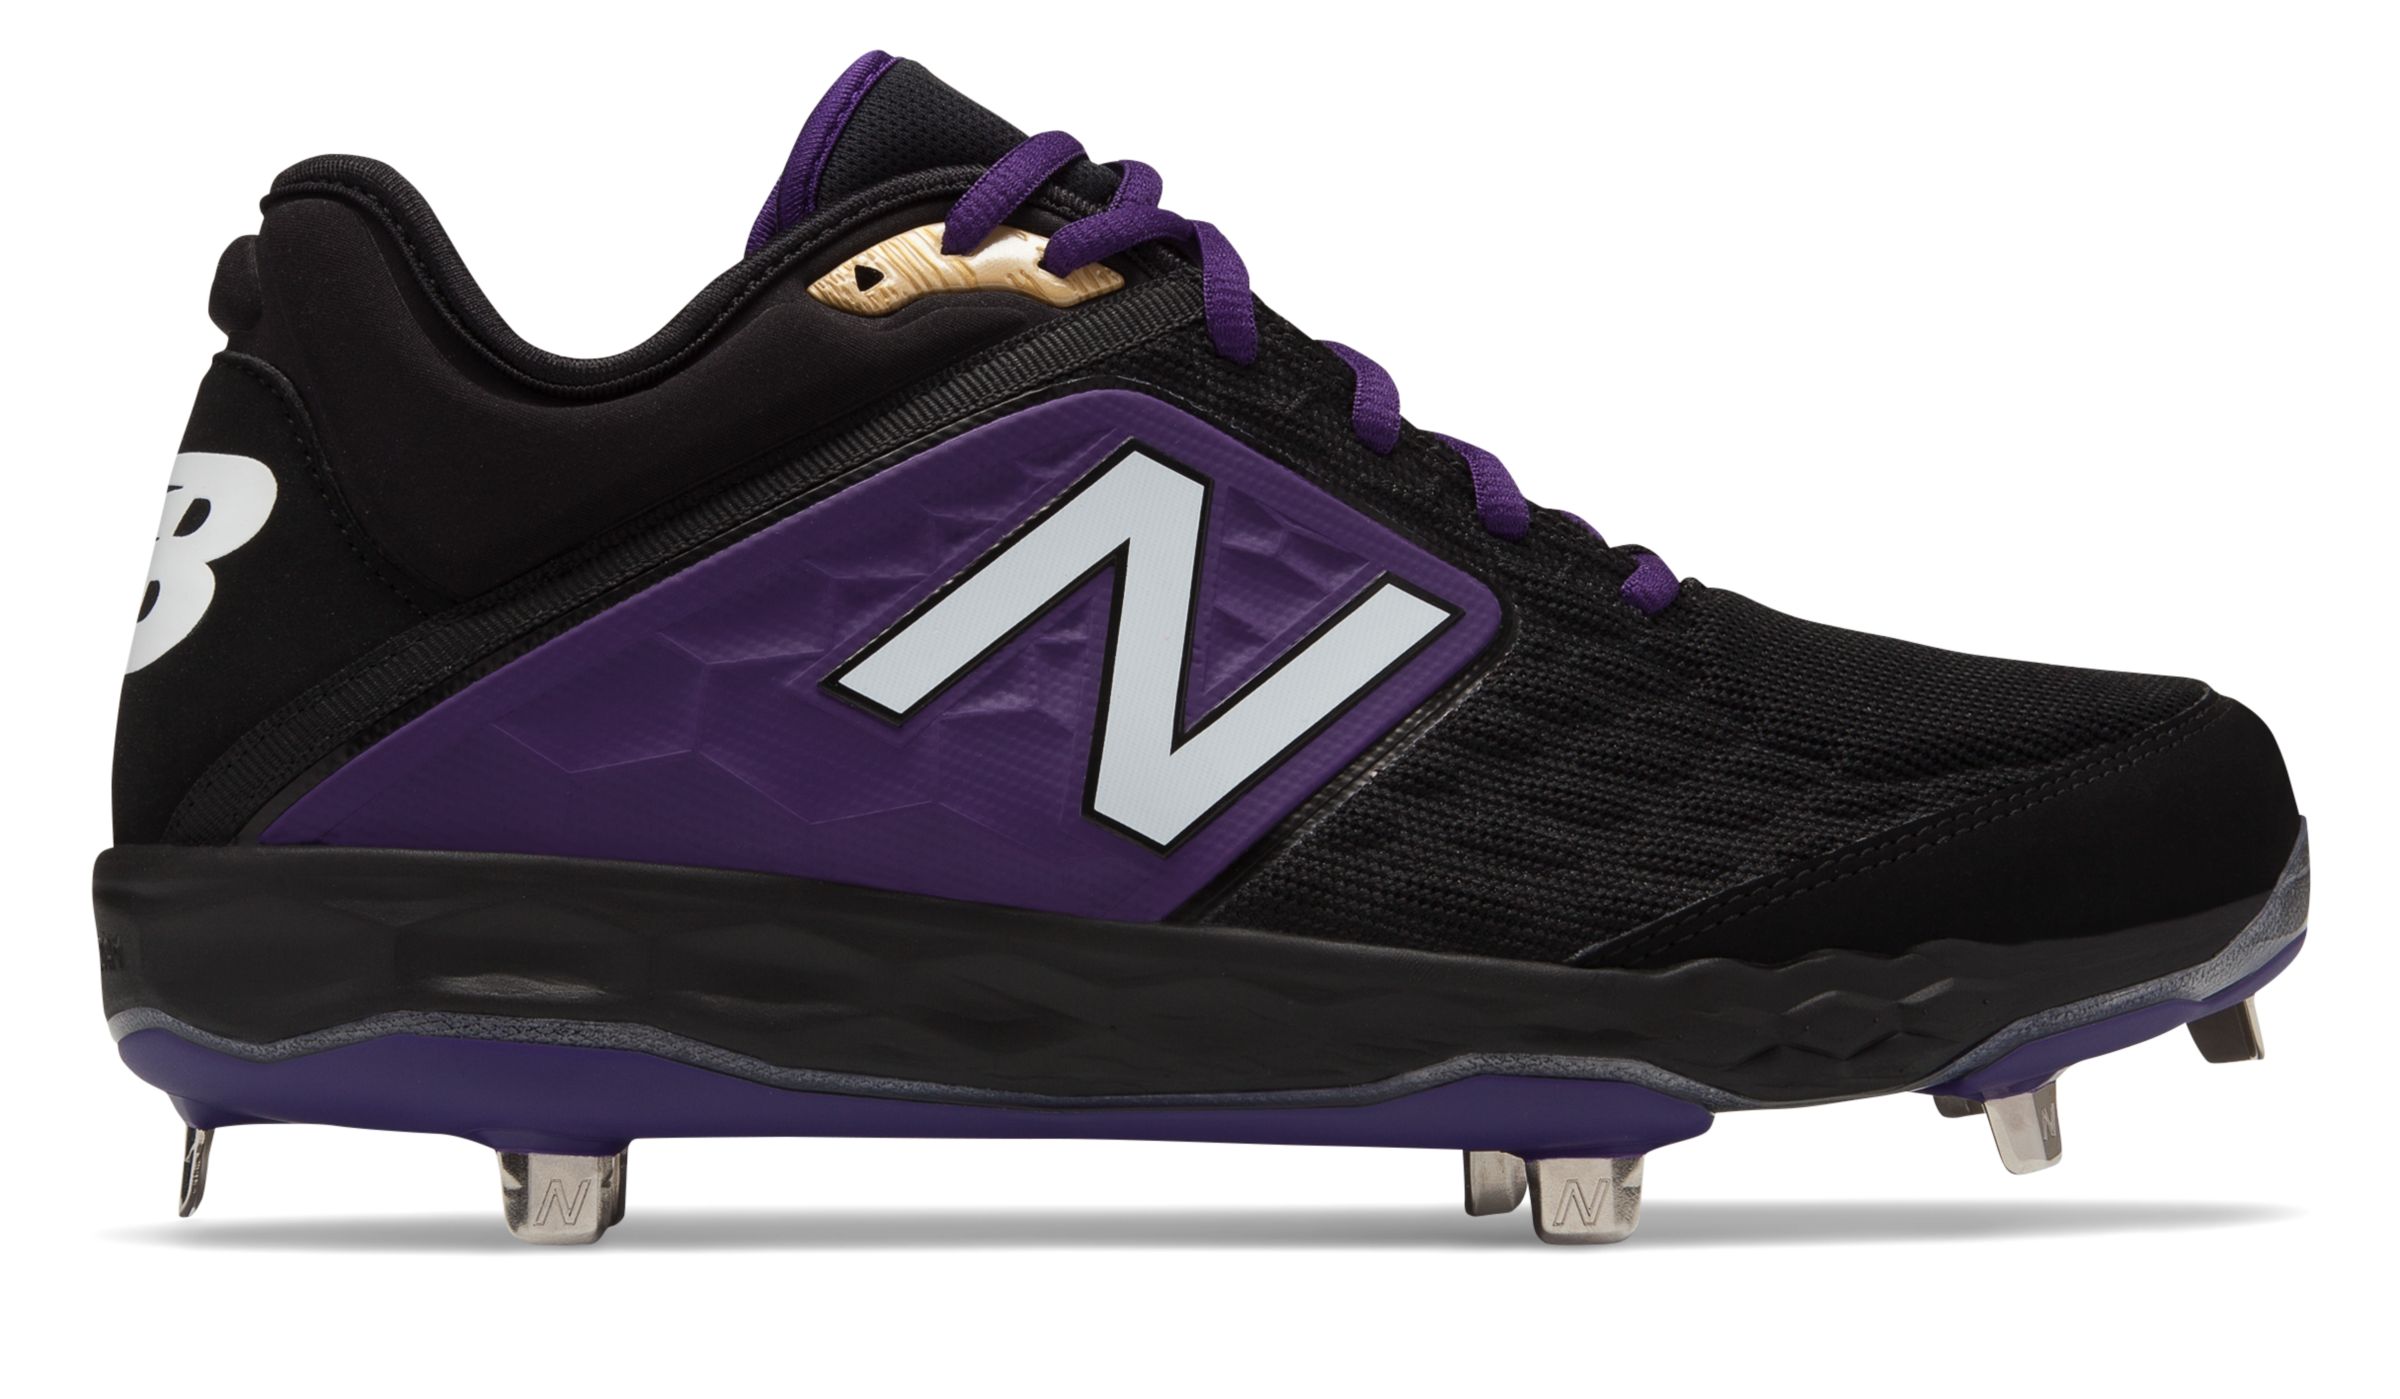 New Balance Low-Cut 3000v4 Metal Baseball Cleat Mens Shoes Black with Purple - image 1 of 4